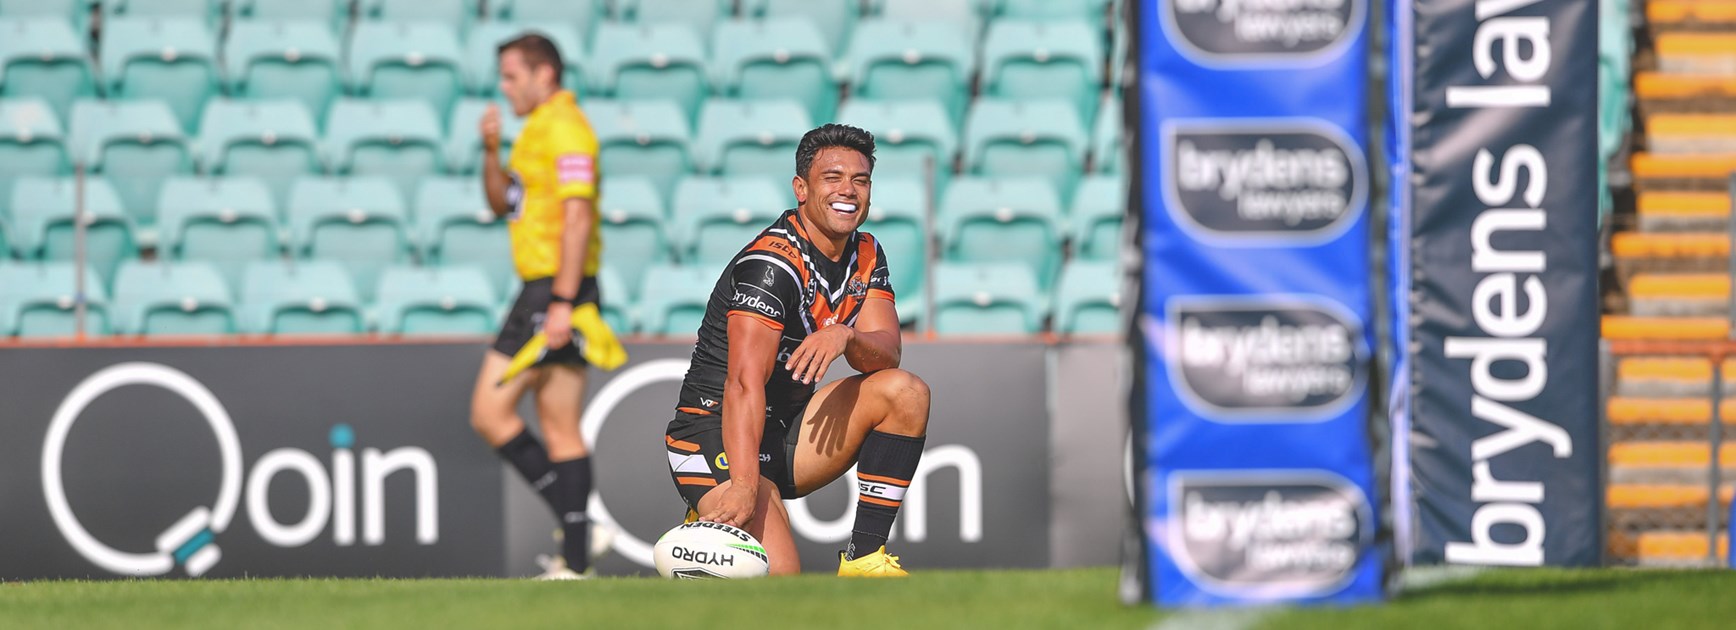 Wests Tigers revised 2020 draw snapshot